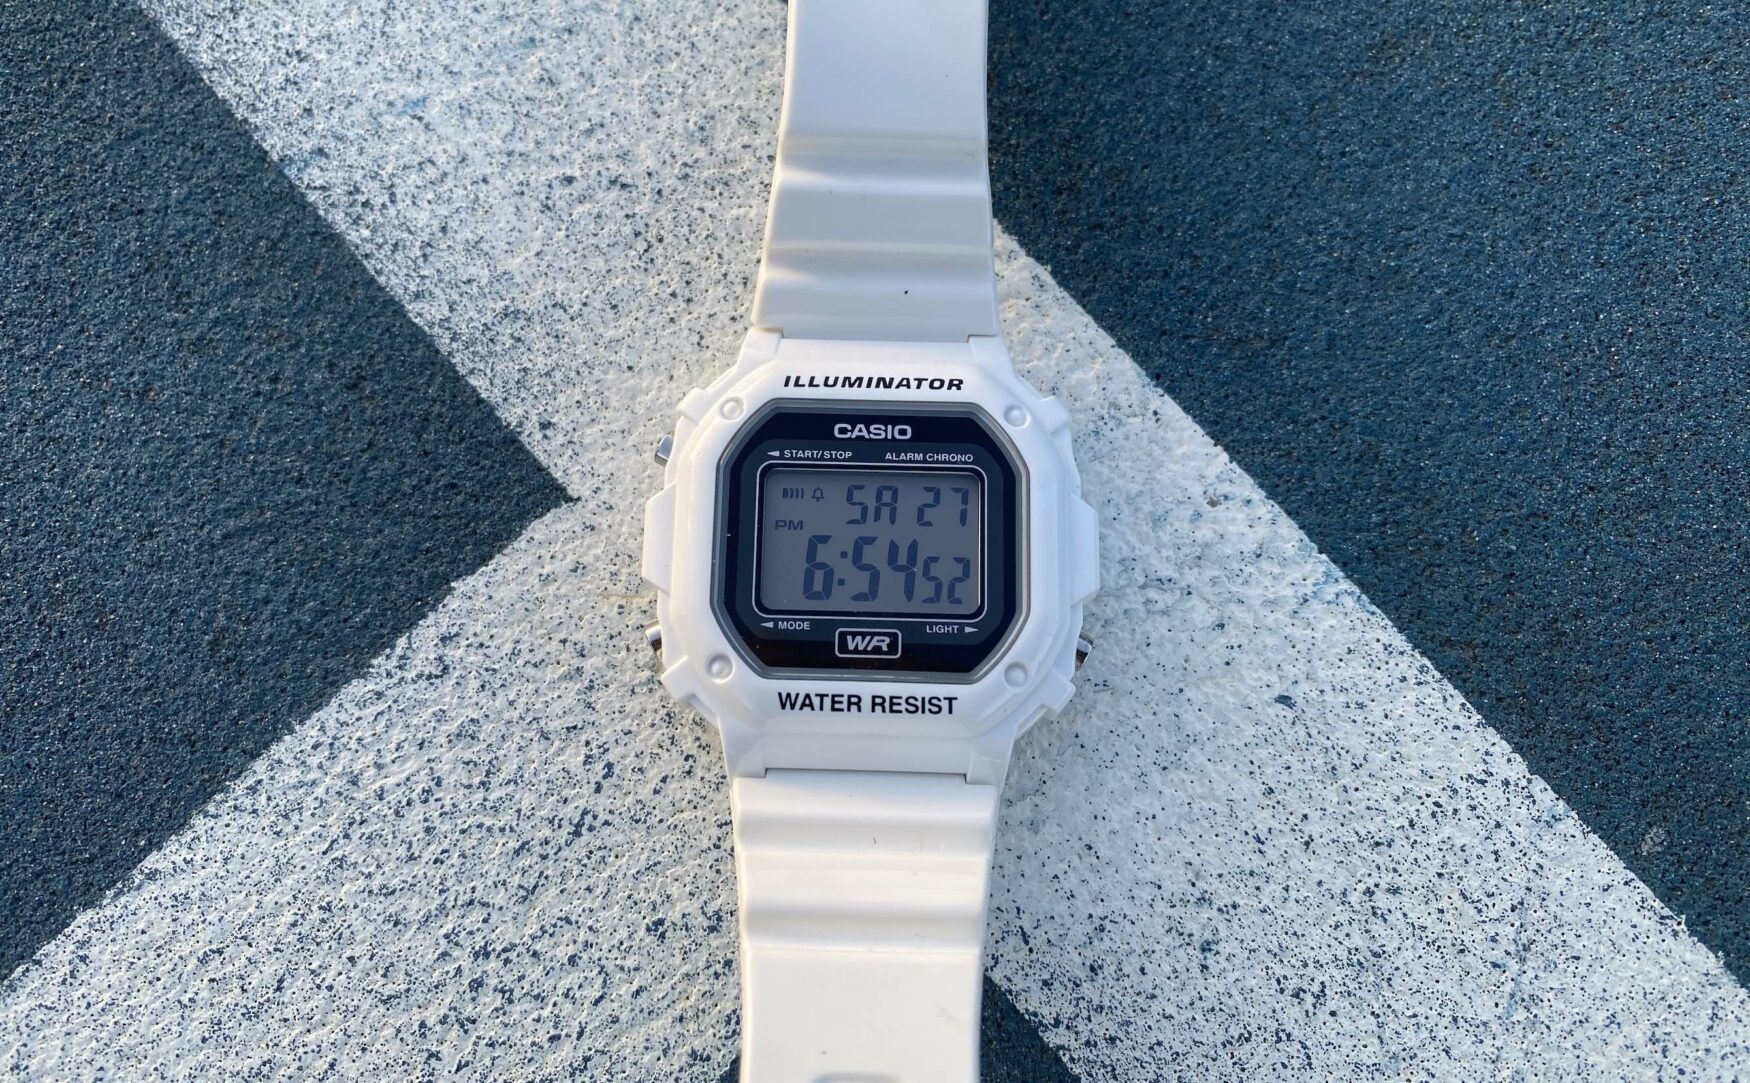 The one watch I’d save in a disaster would be my $22 Casio world-beater